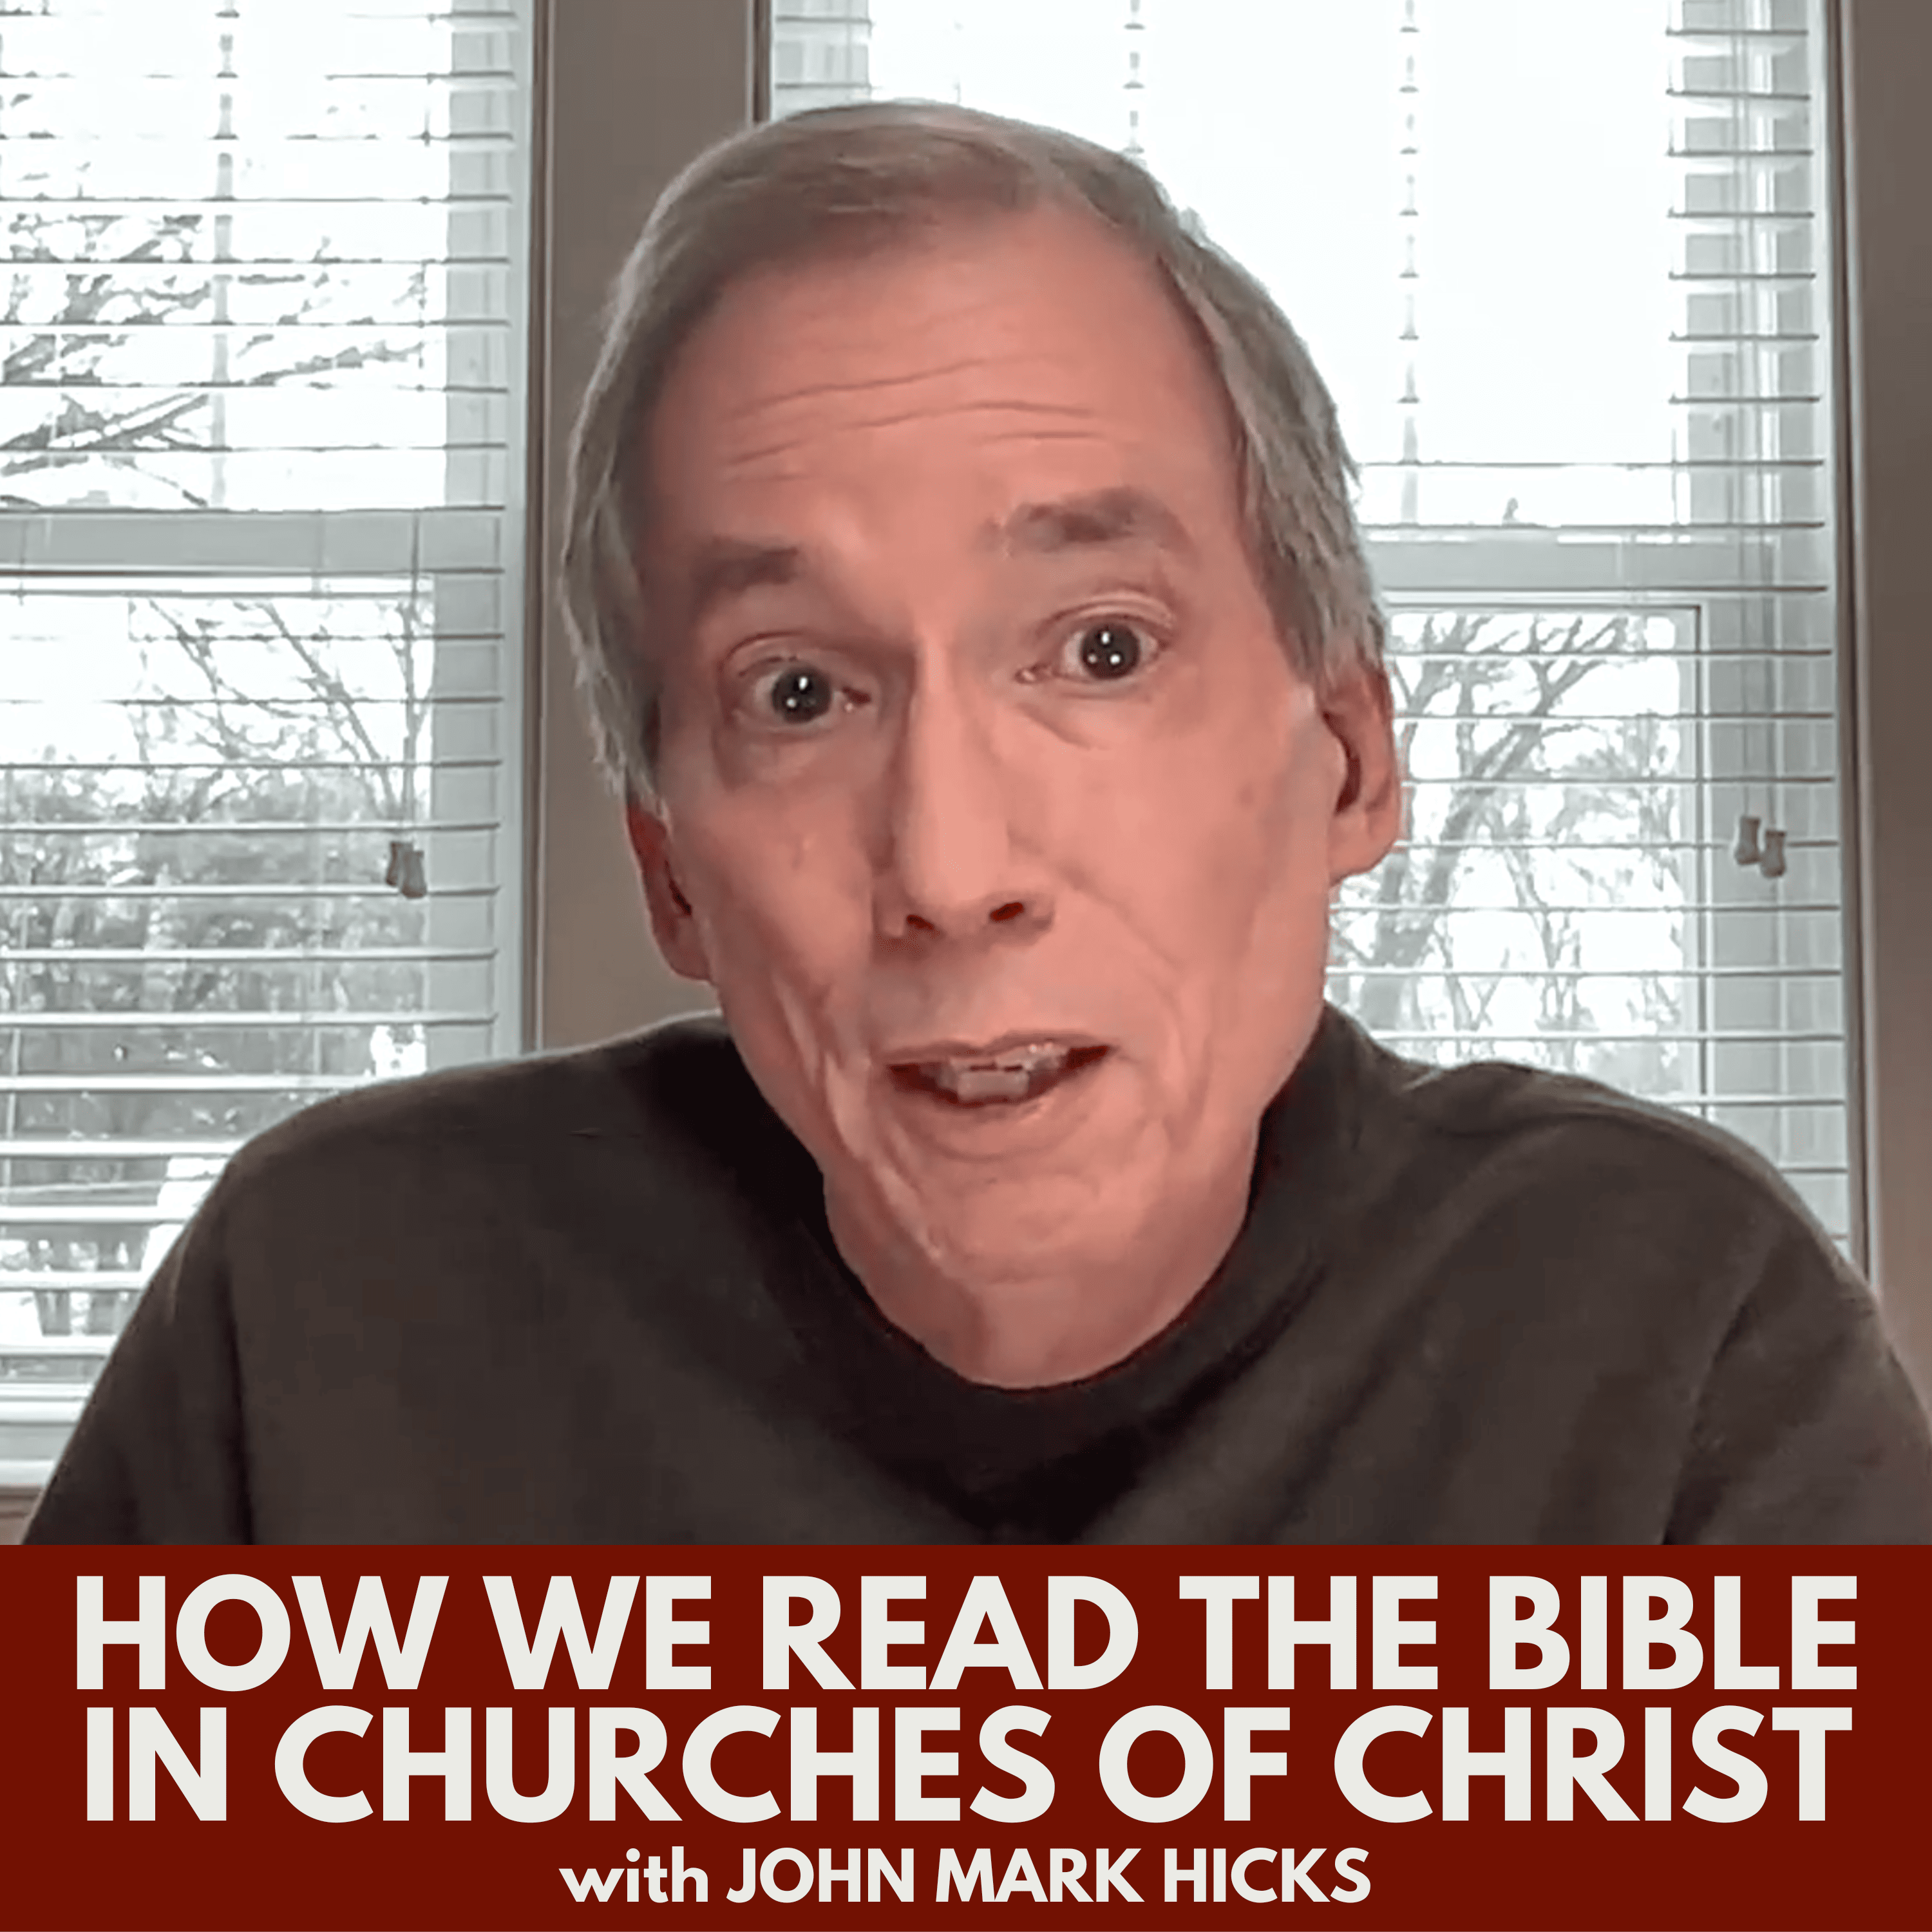 How We Read the Bible in Churches of Christ with John Mark Hicks